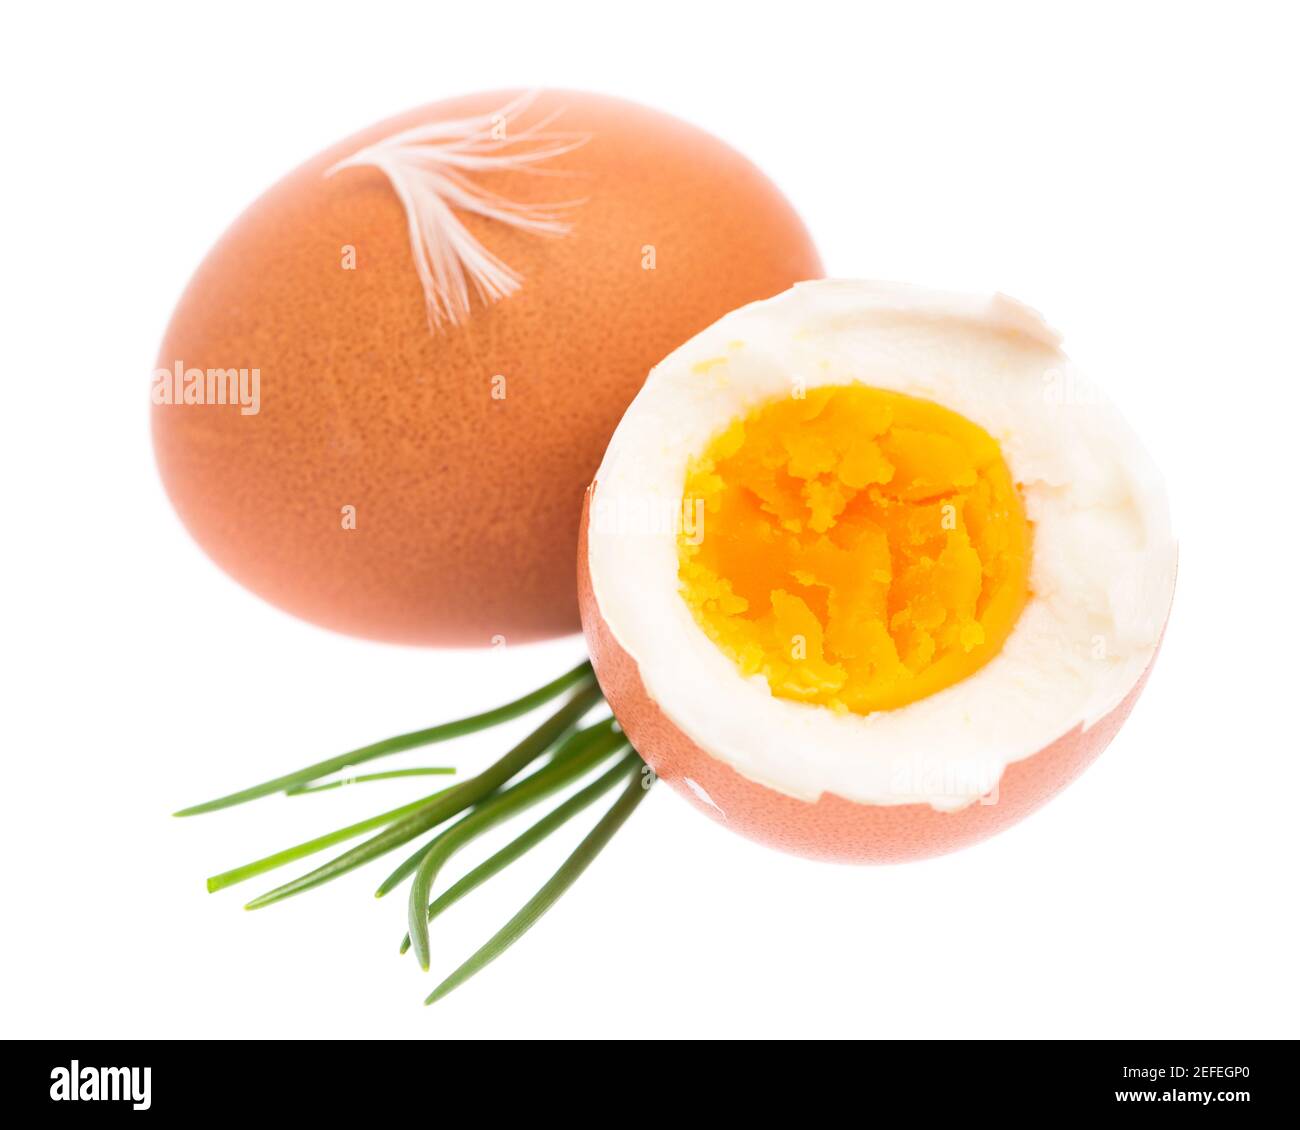 Boiled egg with chives against a white background Stock Photo